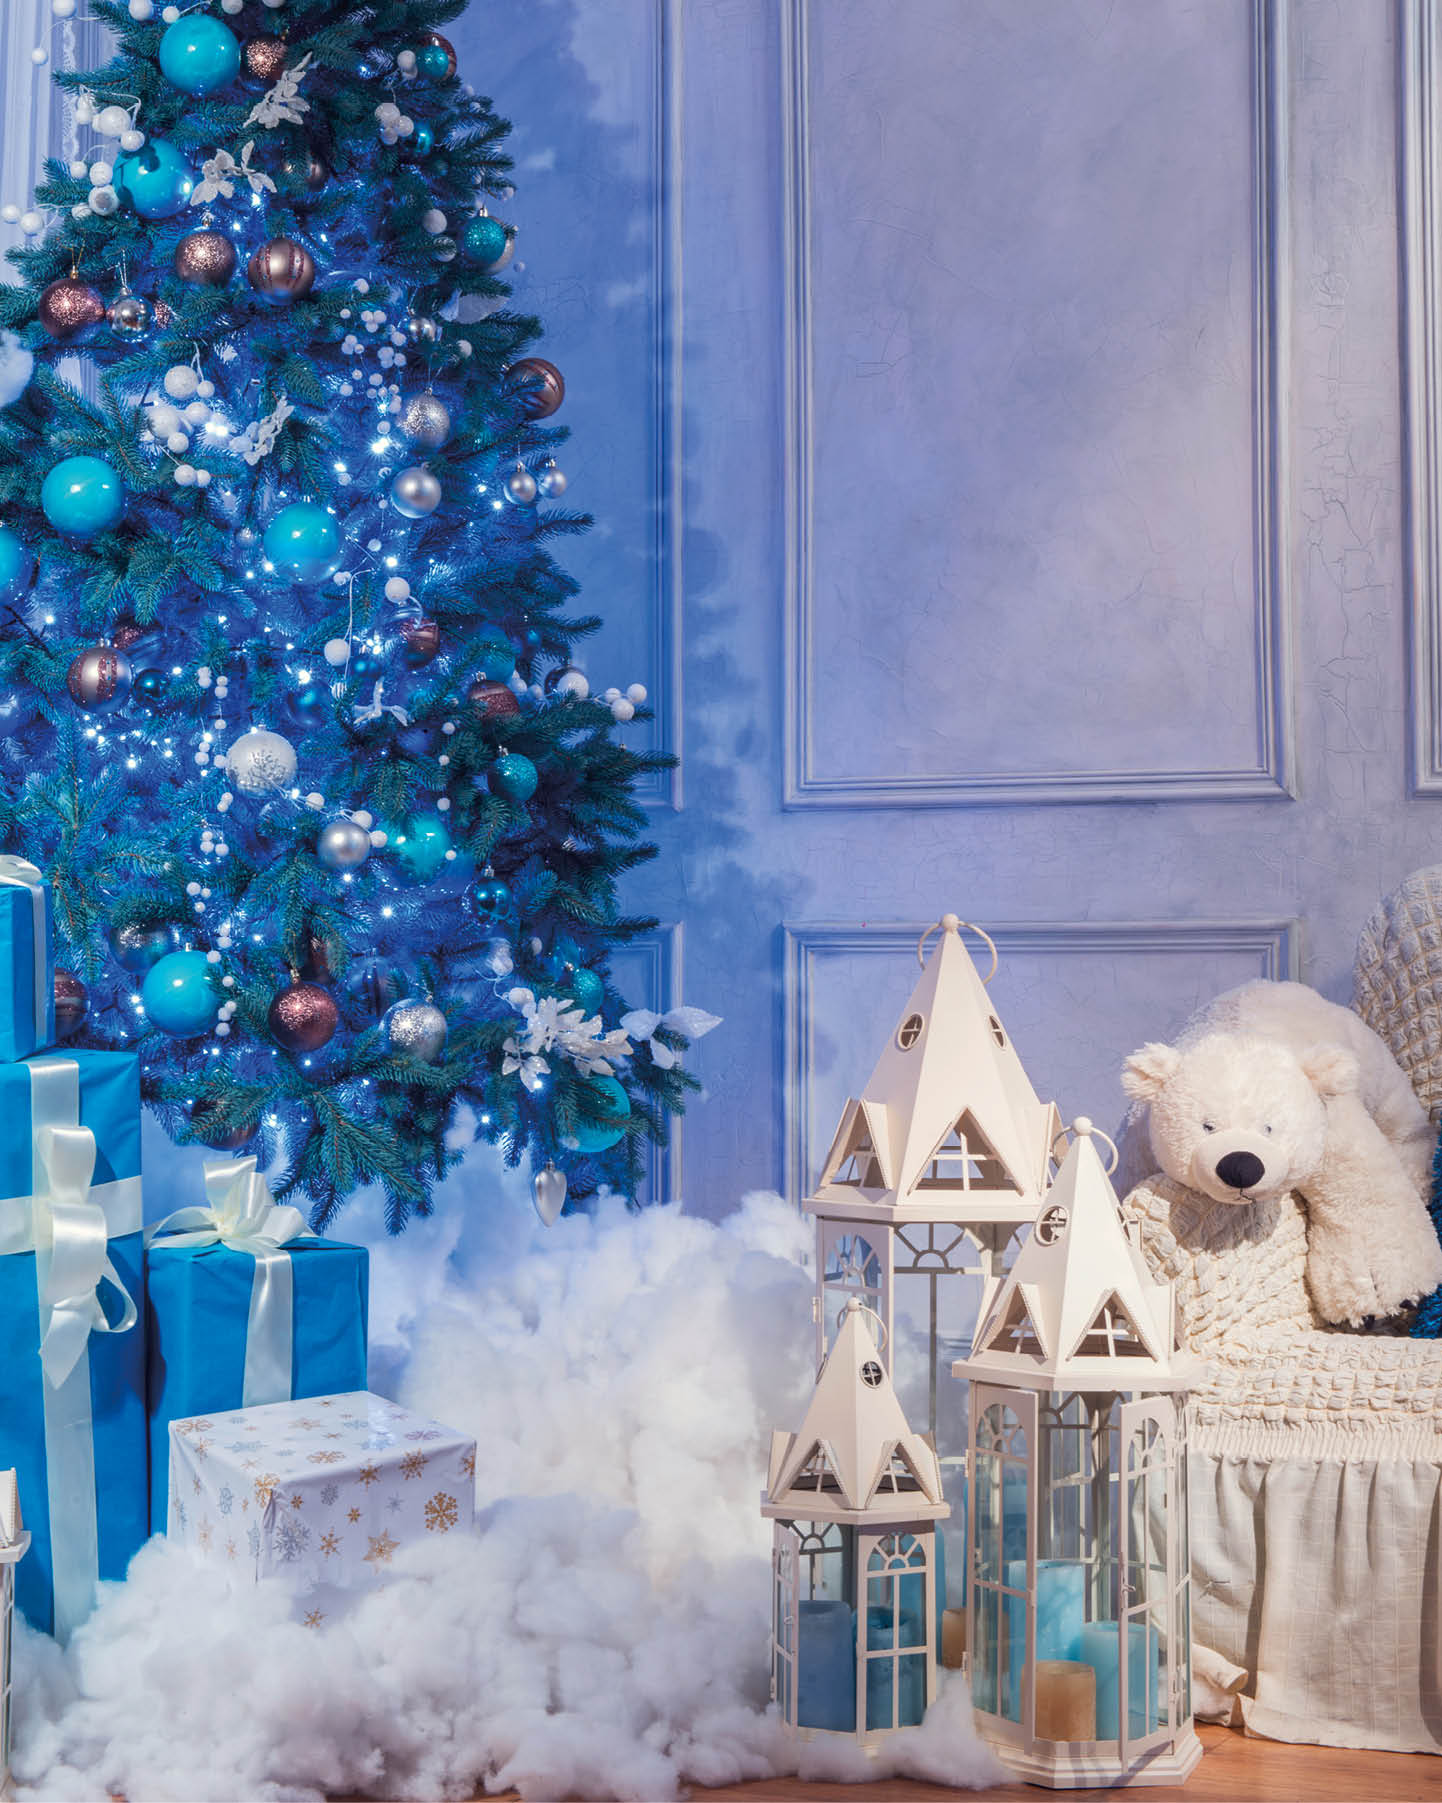 Christmas interior. Beautifully decorated Christmas interior with high blue fur tree surrounded by white lanterns, candles and wrapped presents covered with decorative snow